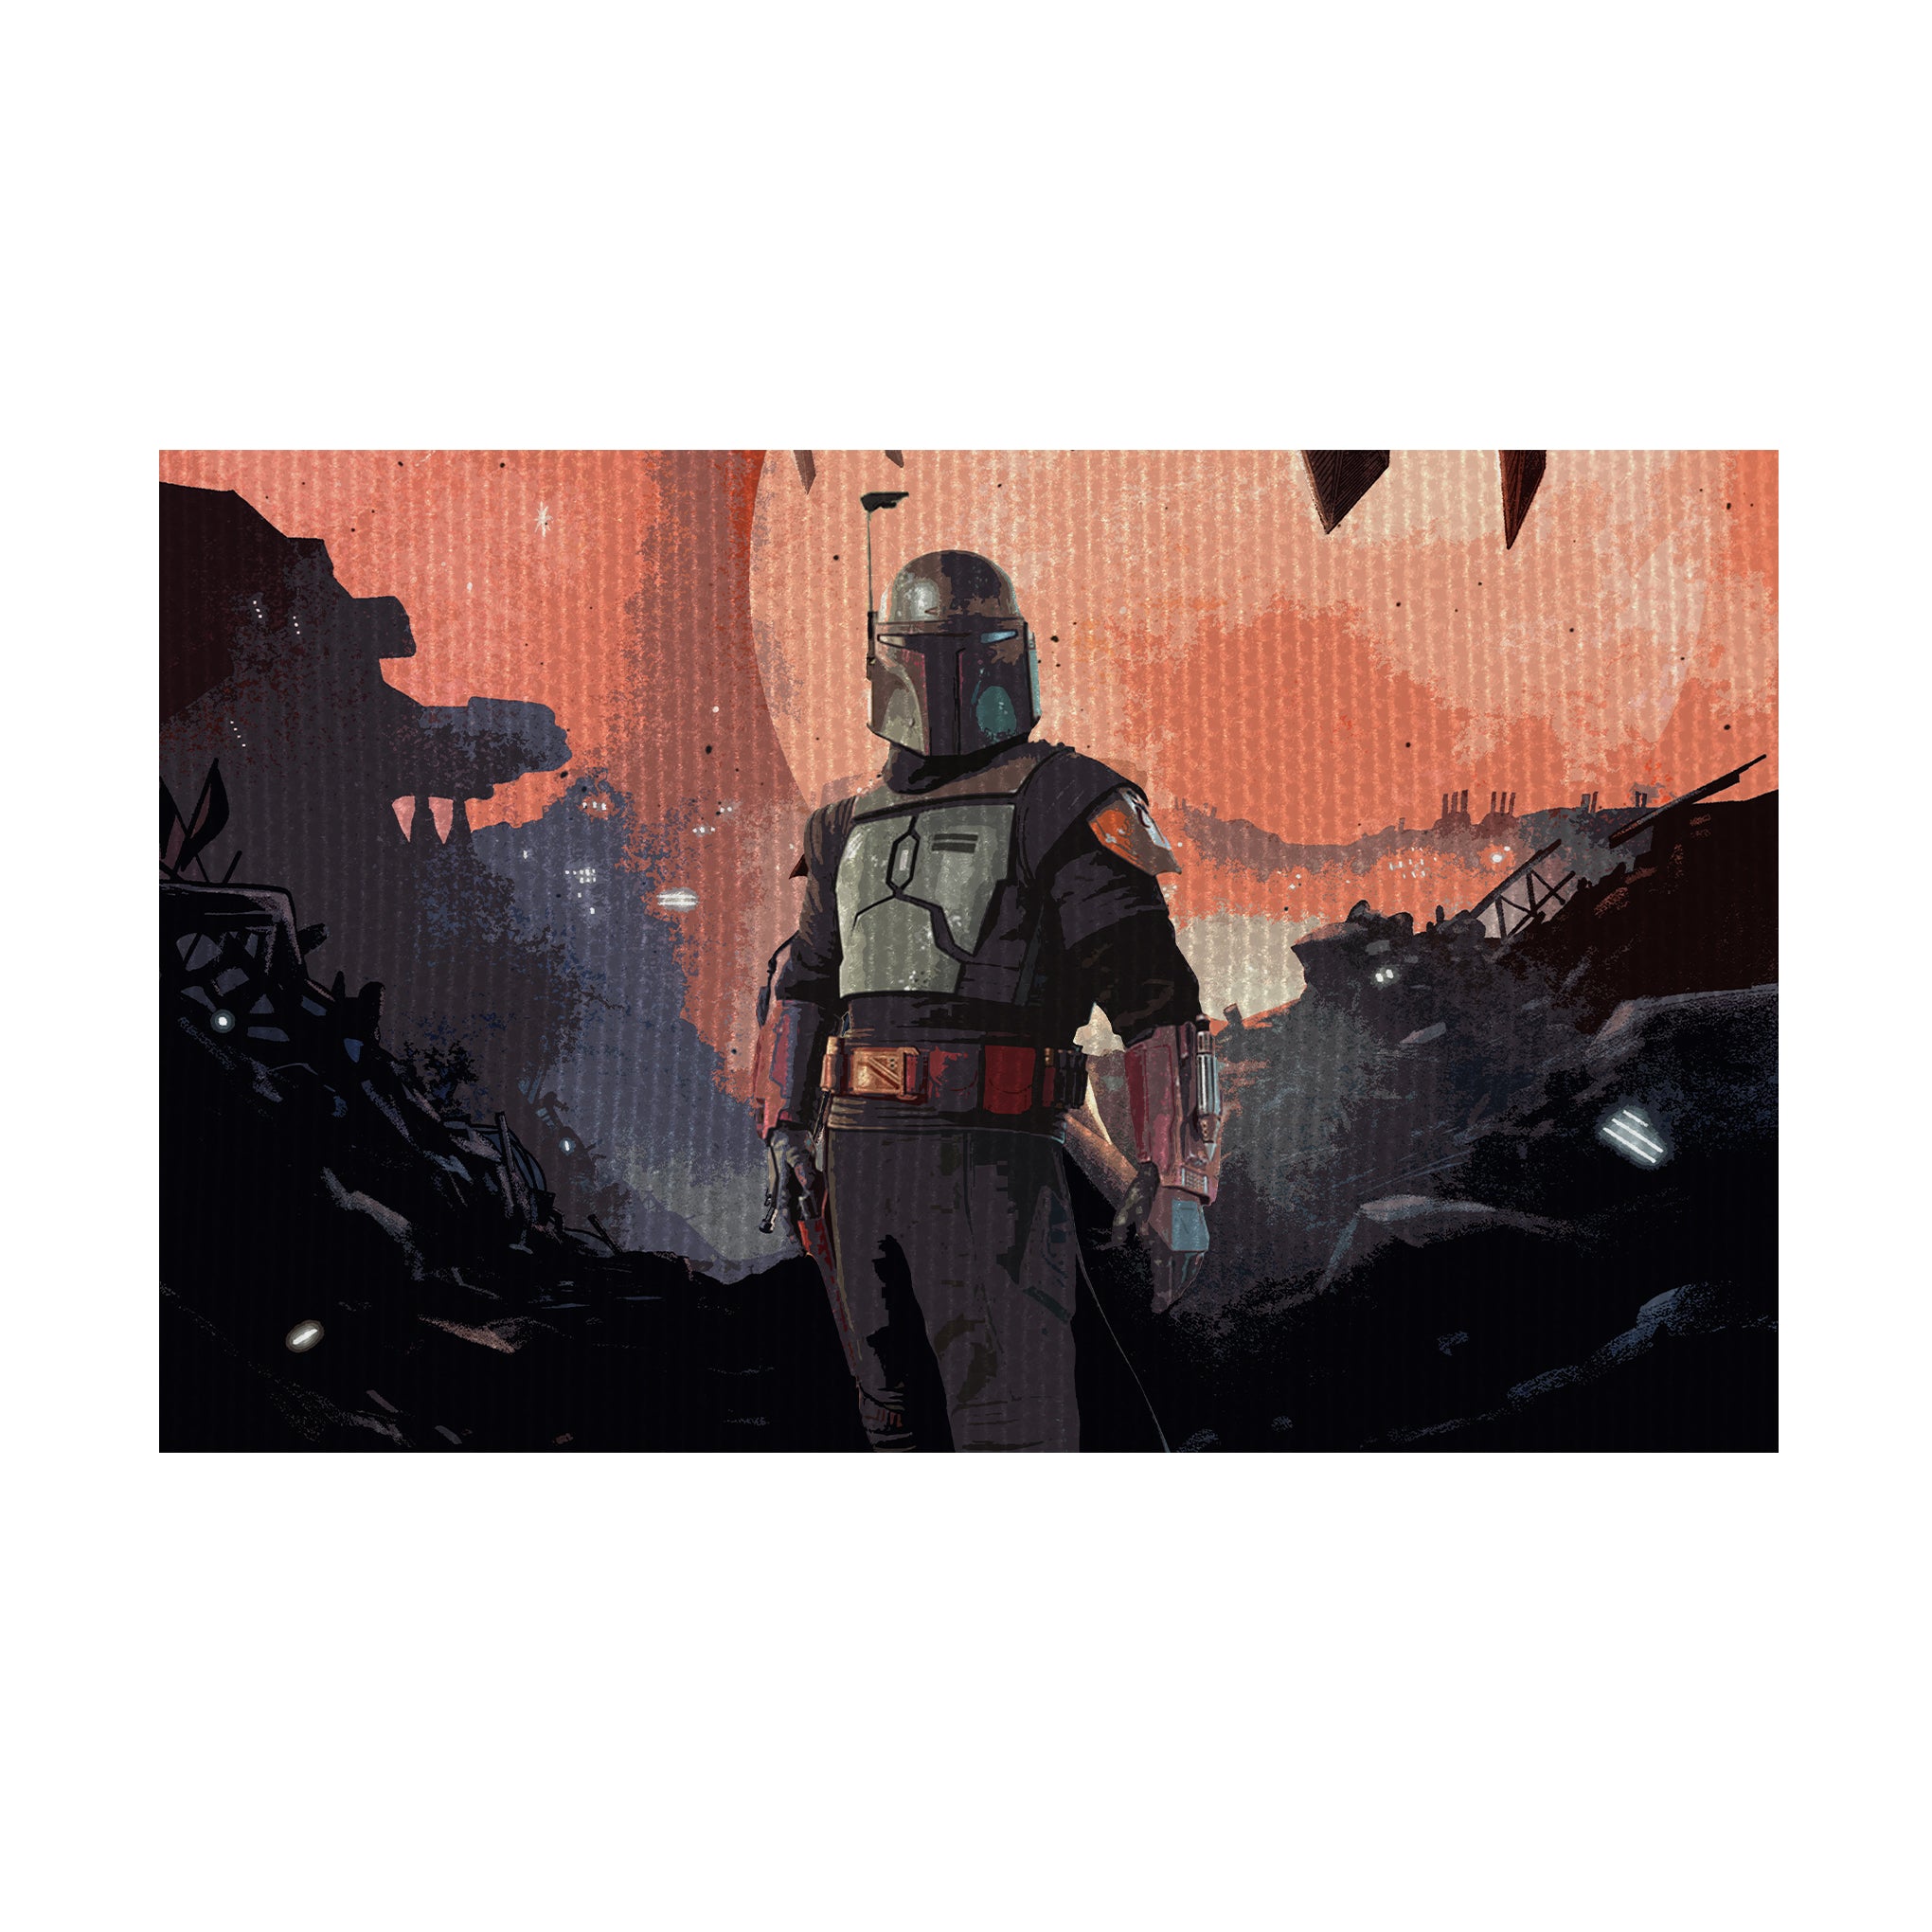 Boba Fett - End of new beginning inspired Gaming Rug - 62x40 inches